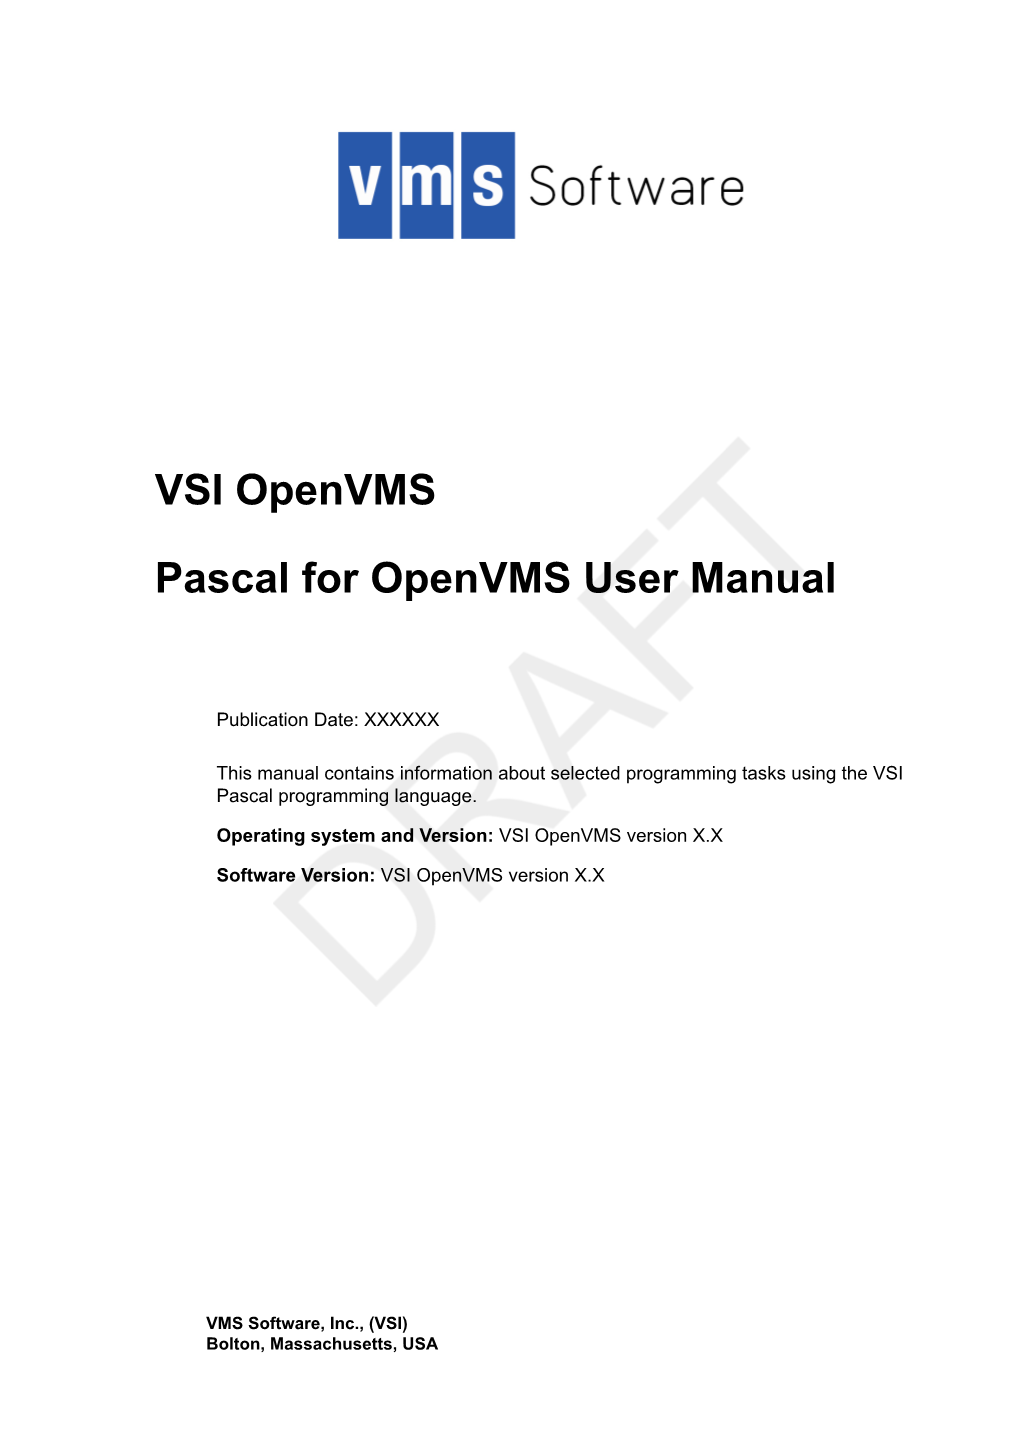 Pascal for Openvms User Manual